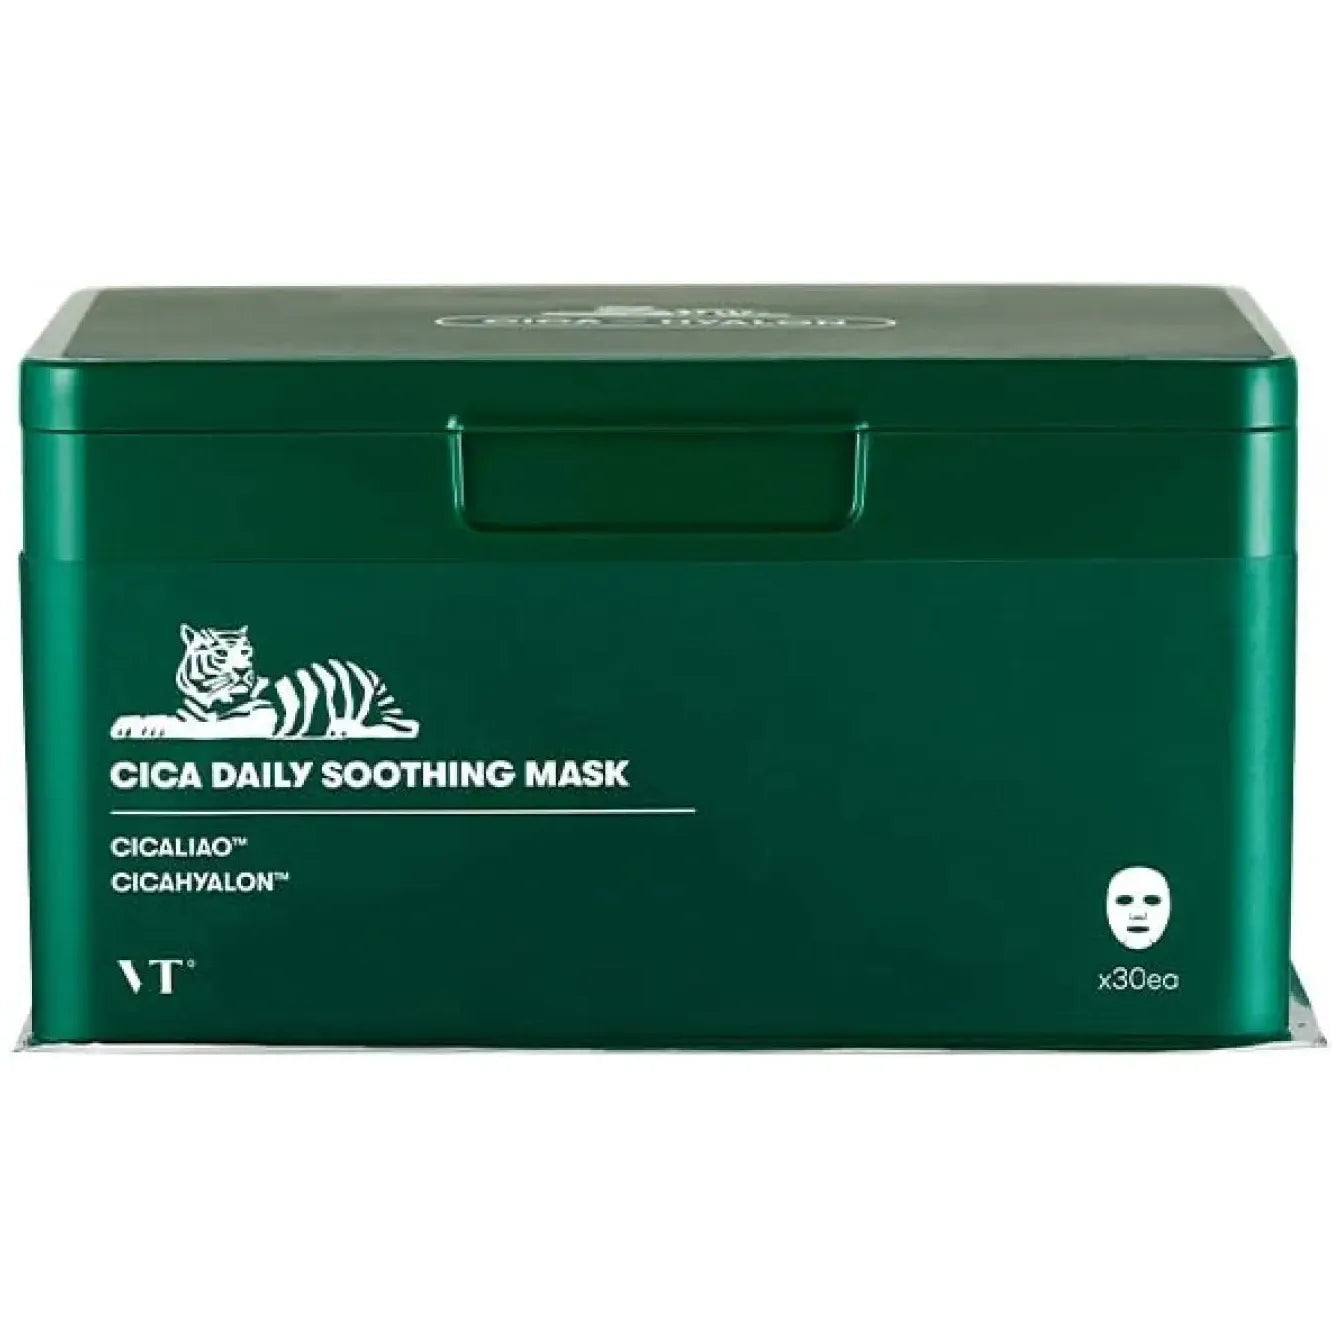 [VT COSMETICS] Cica Daily Soothing Mask 30ea / (30 sheets) [Parallel imports] - Face